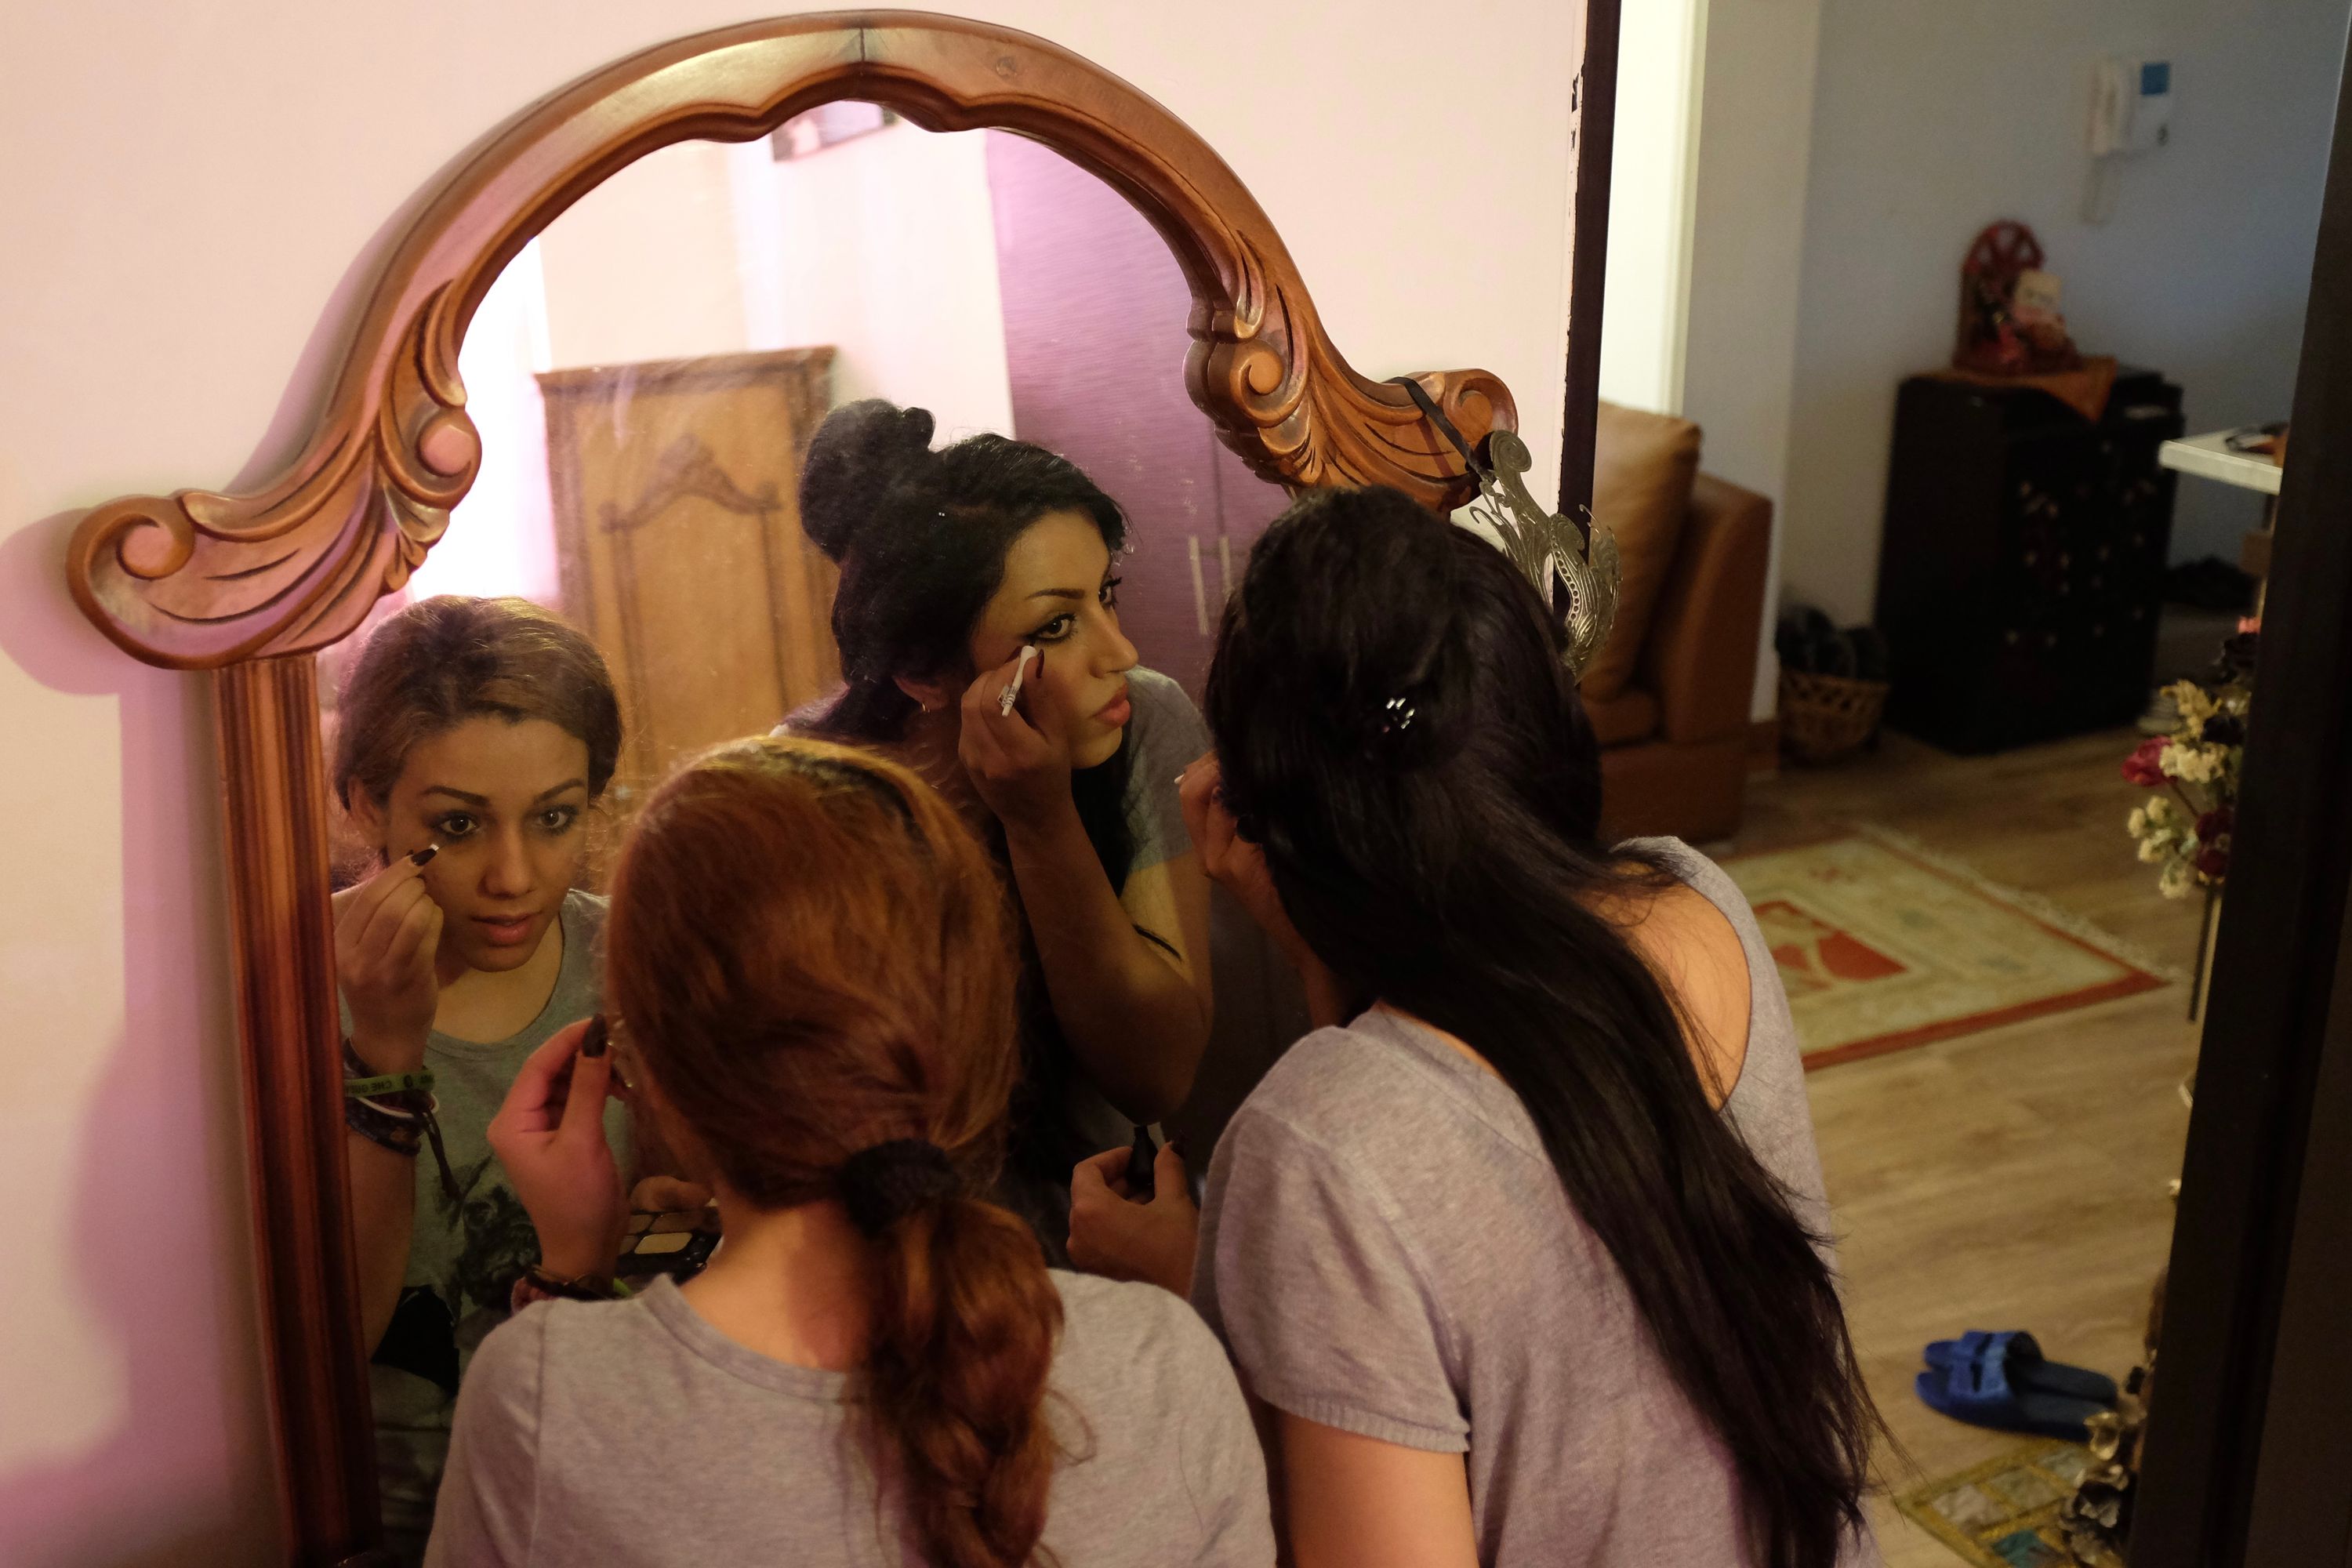 The black-haired woman is joined by a brown-haired woman in front of a mirror, where they apply makeup together.